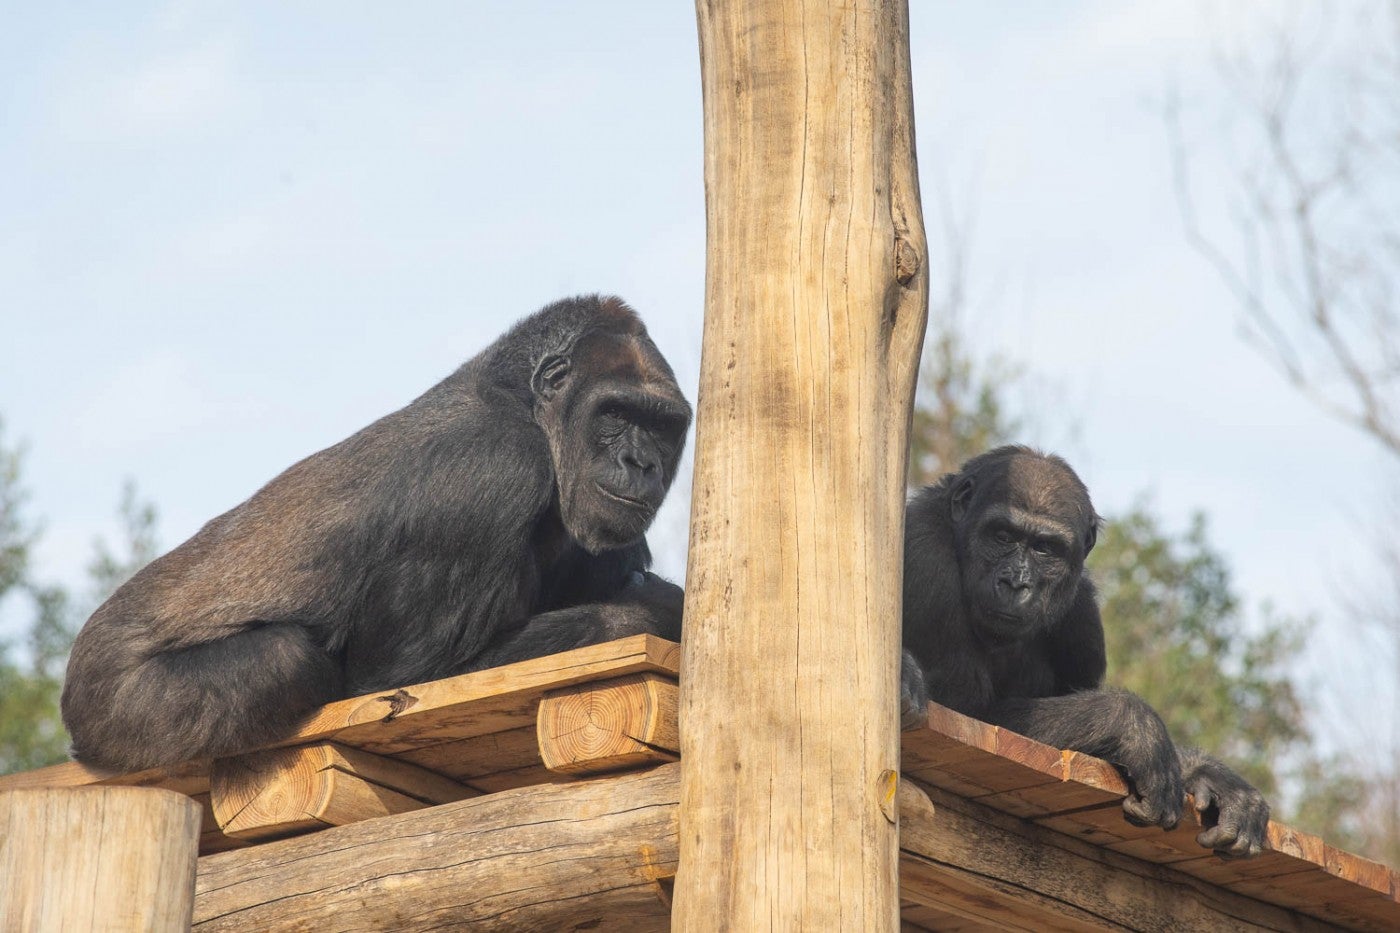 Western lowland gorillas Calaya and her son Moke people-watch from the top of their climbing structure